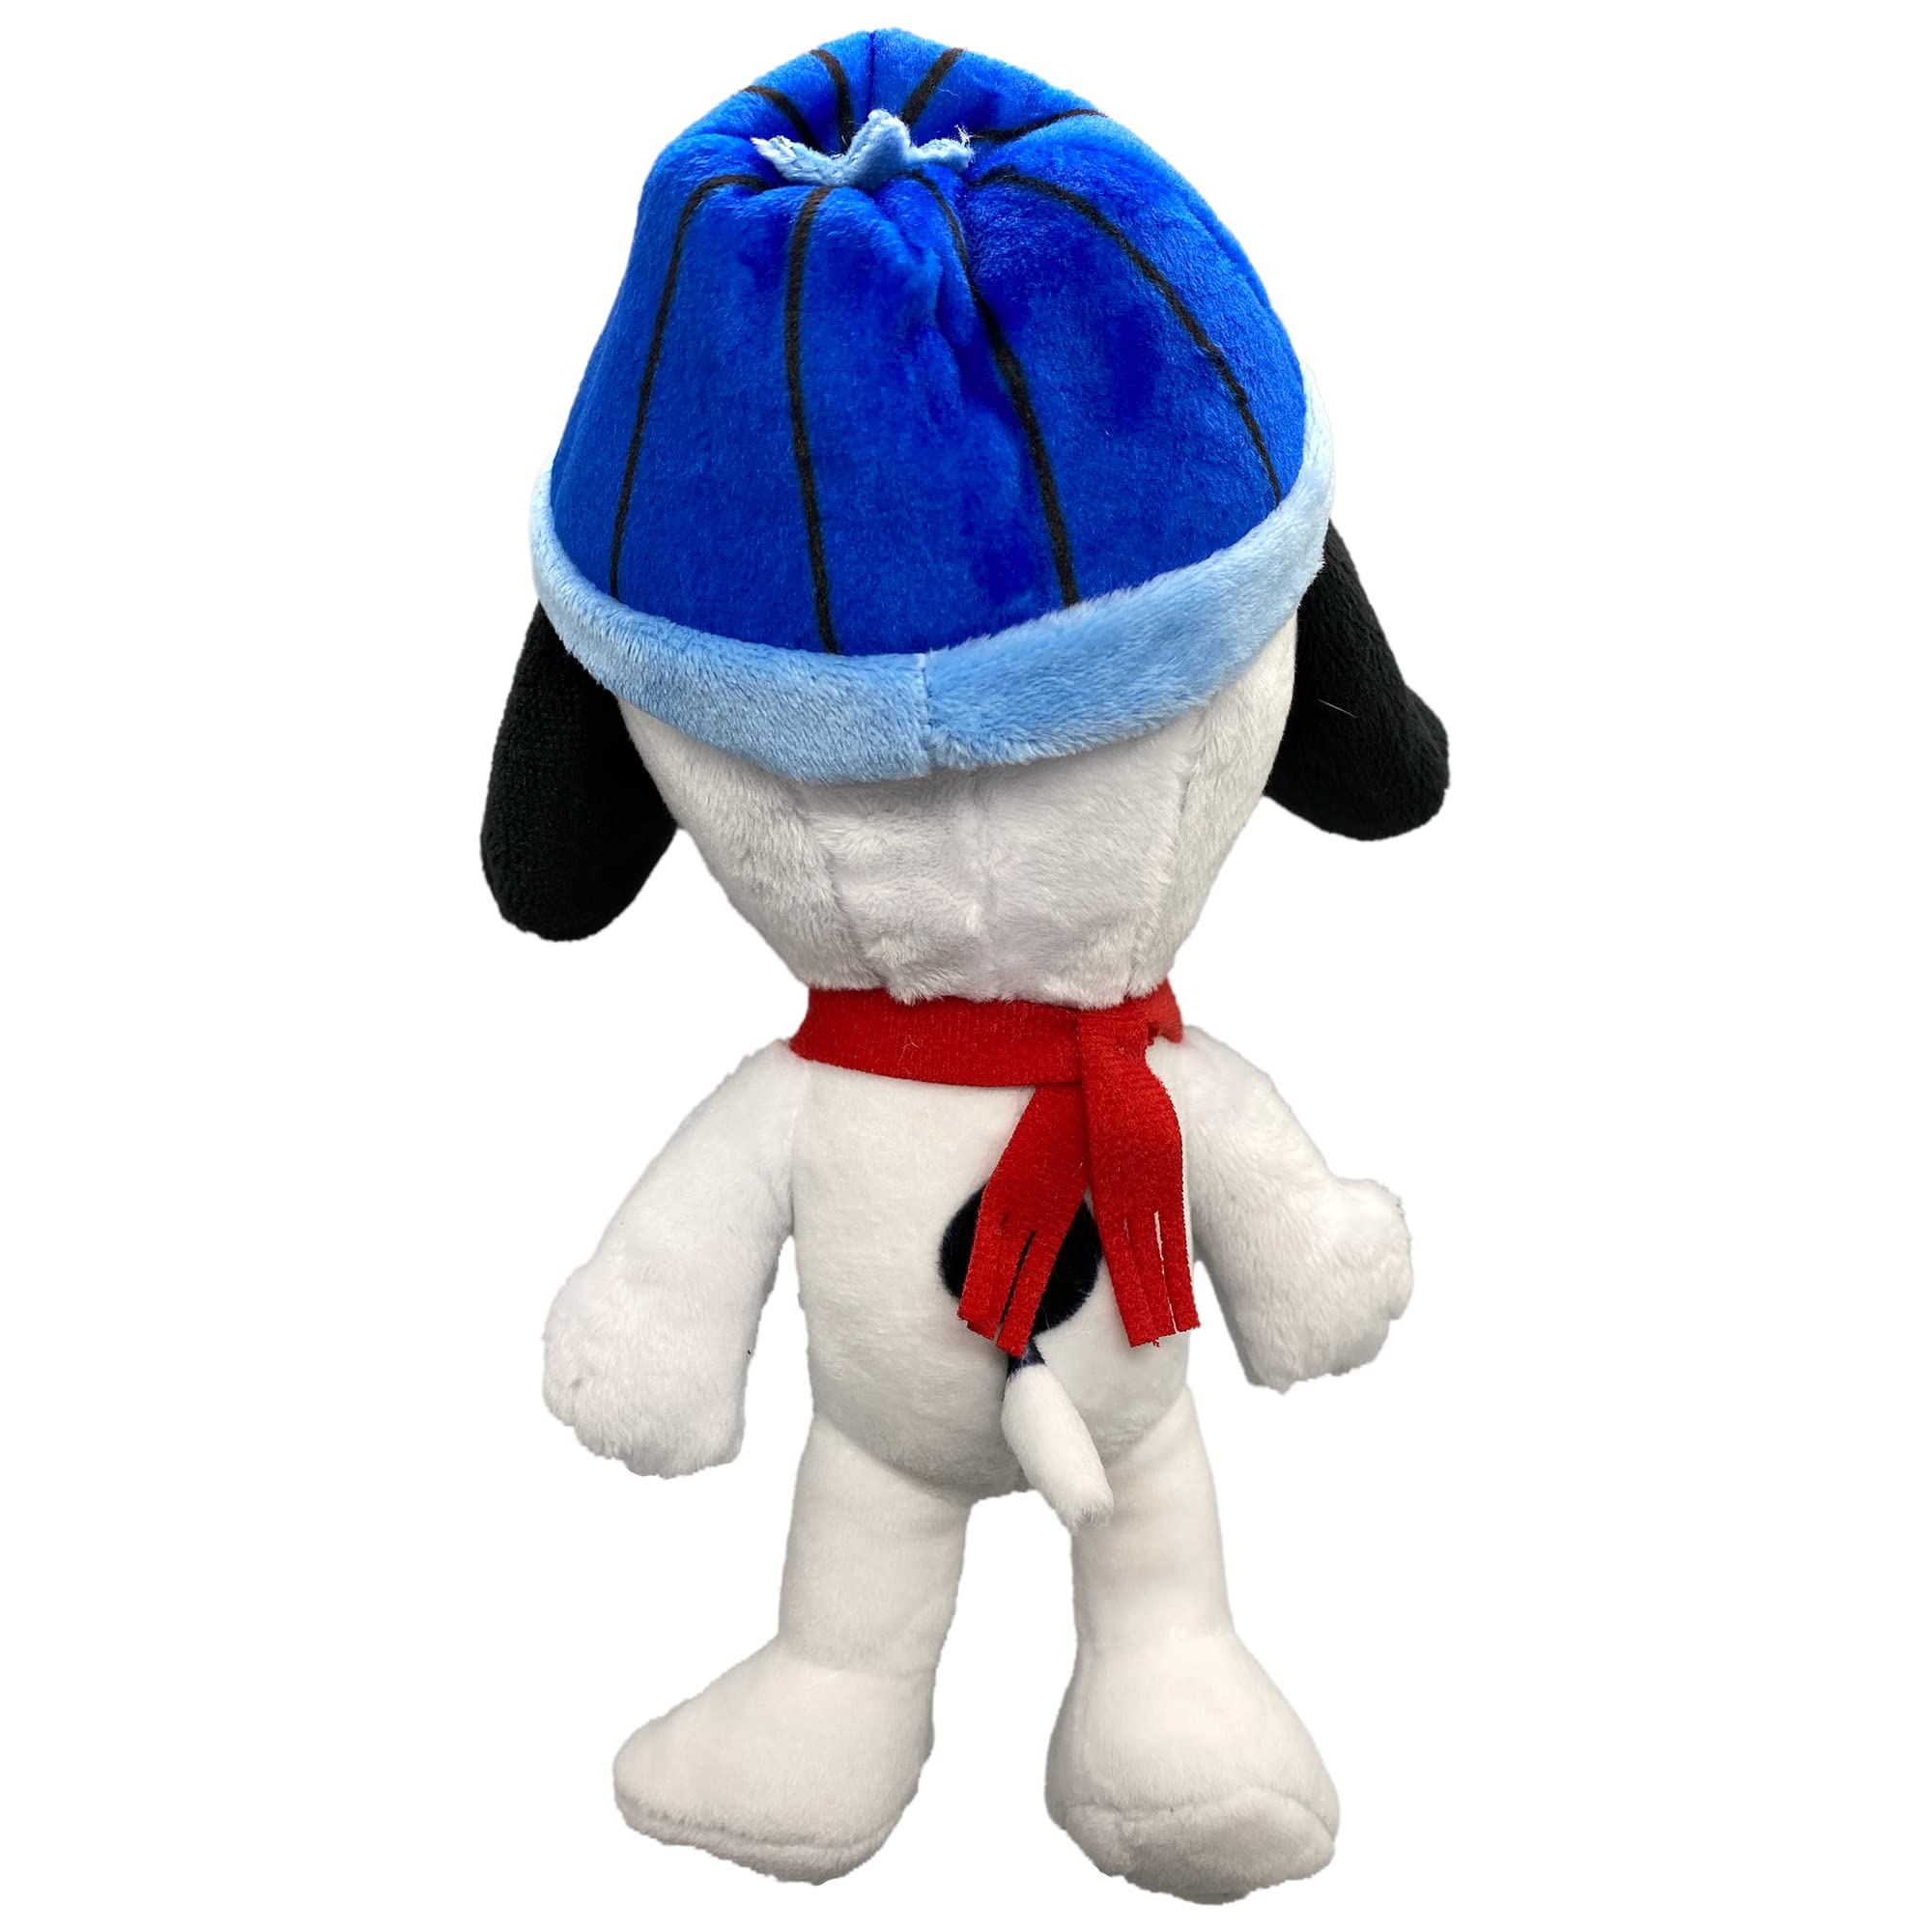 JINX Official Peanuts Collectible Plush Snoopy, Excellent Plushie Toy for Toddlers & Preschool, Blue Beanie